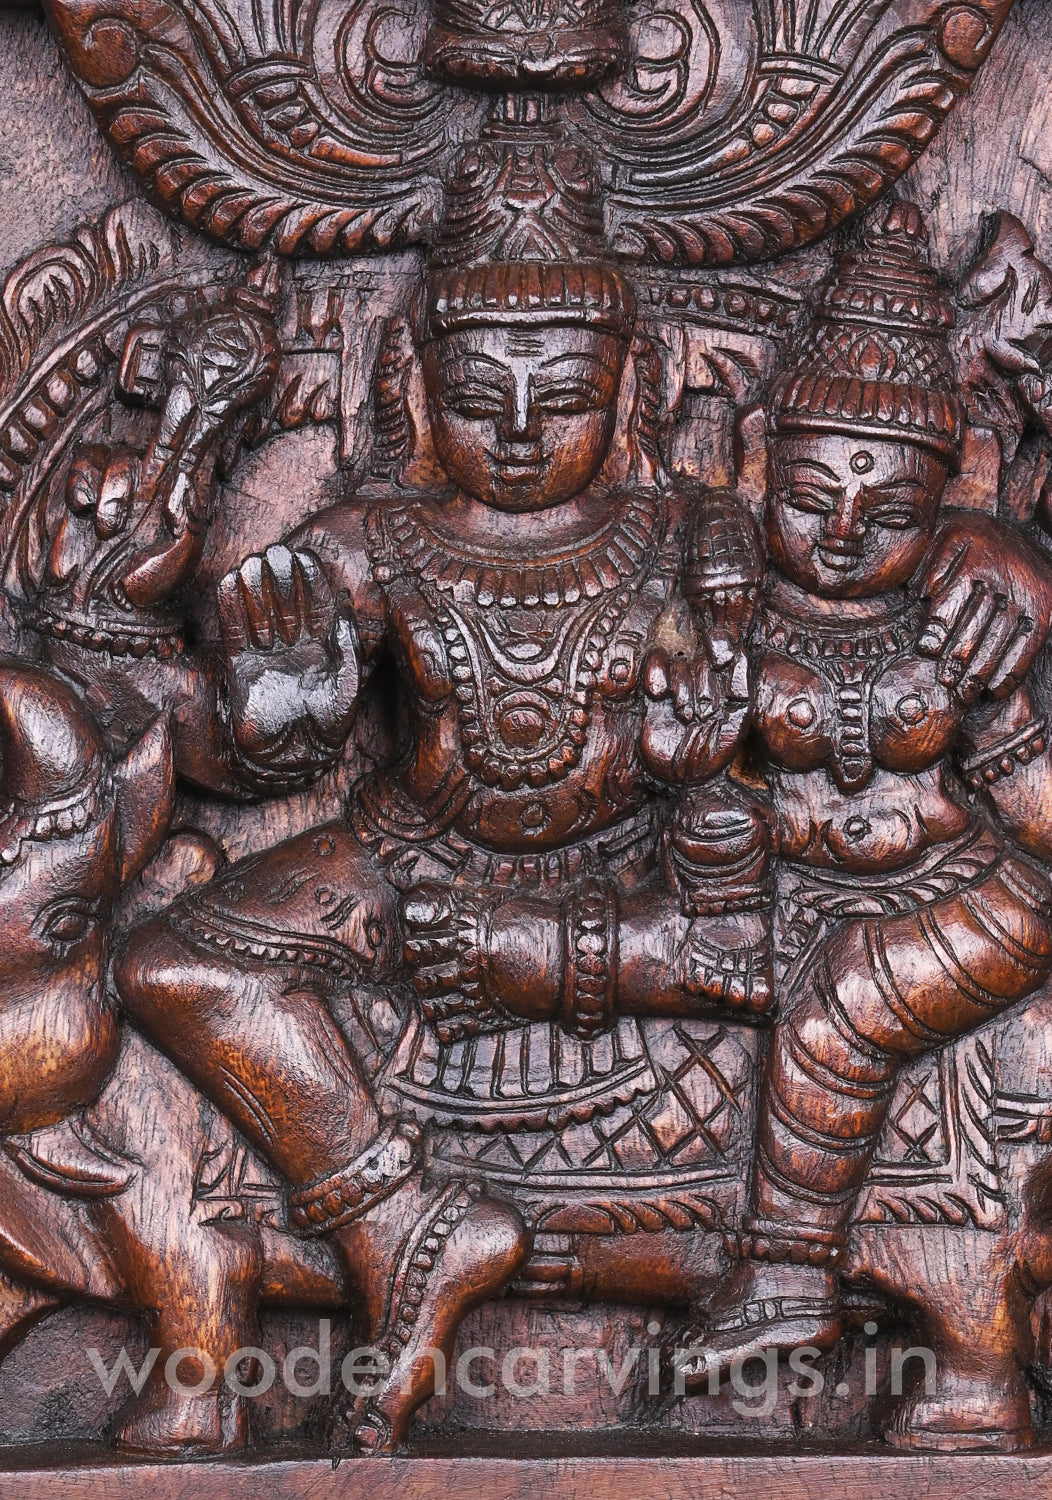 Lord Mahadev with His Consort Devi Parvathi Seated on Wooden Cow Entrance Decor Wall Mount 12"